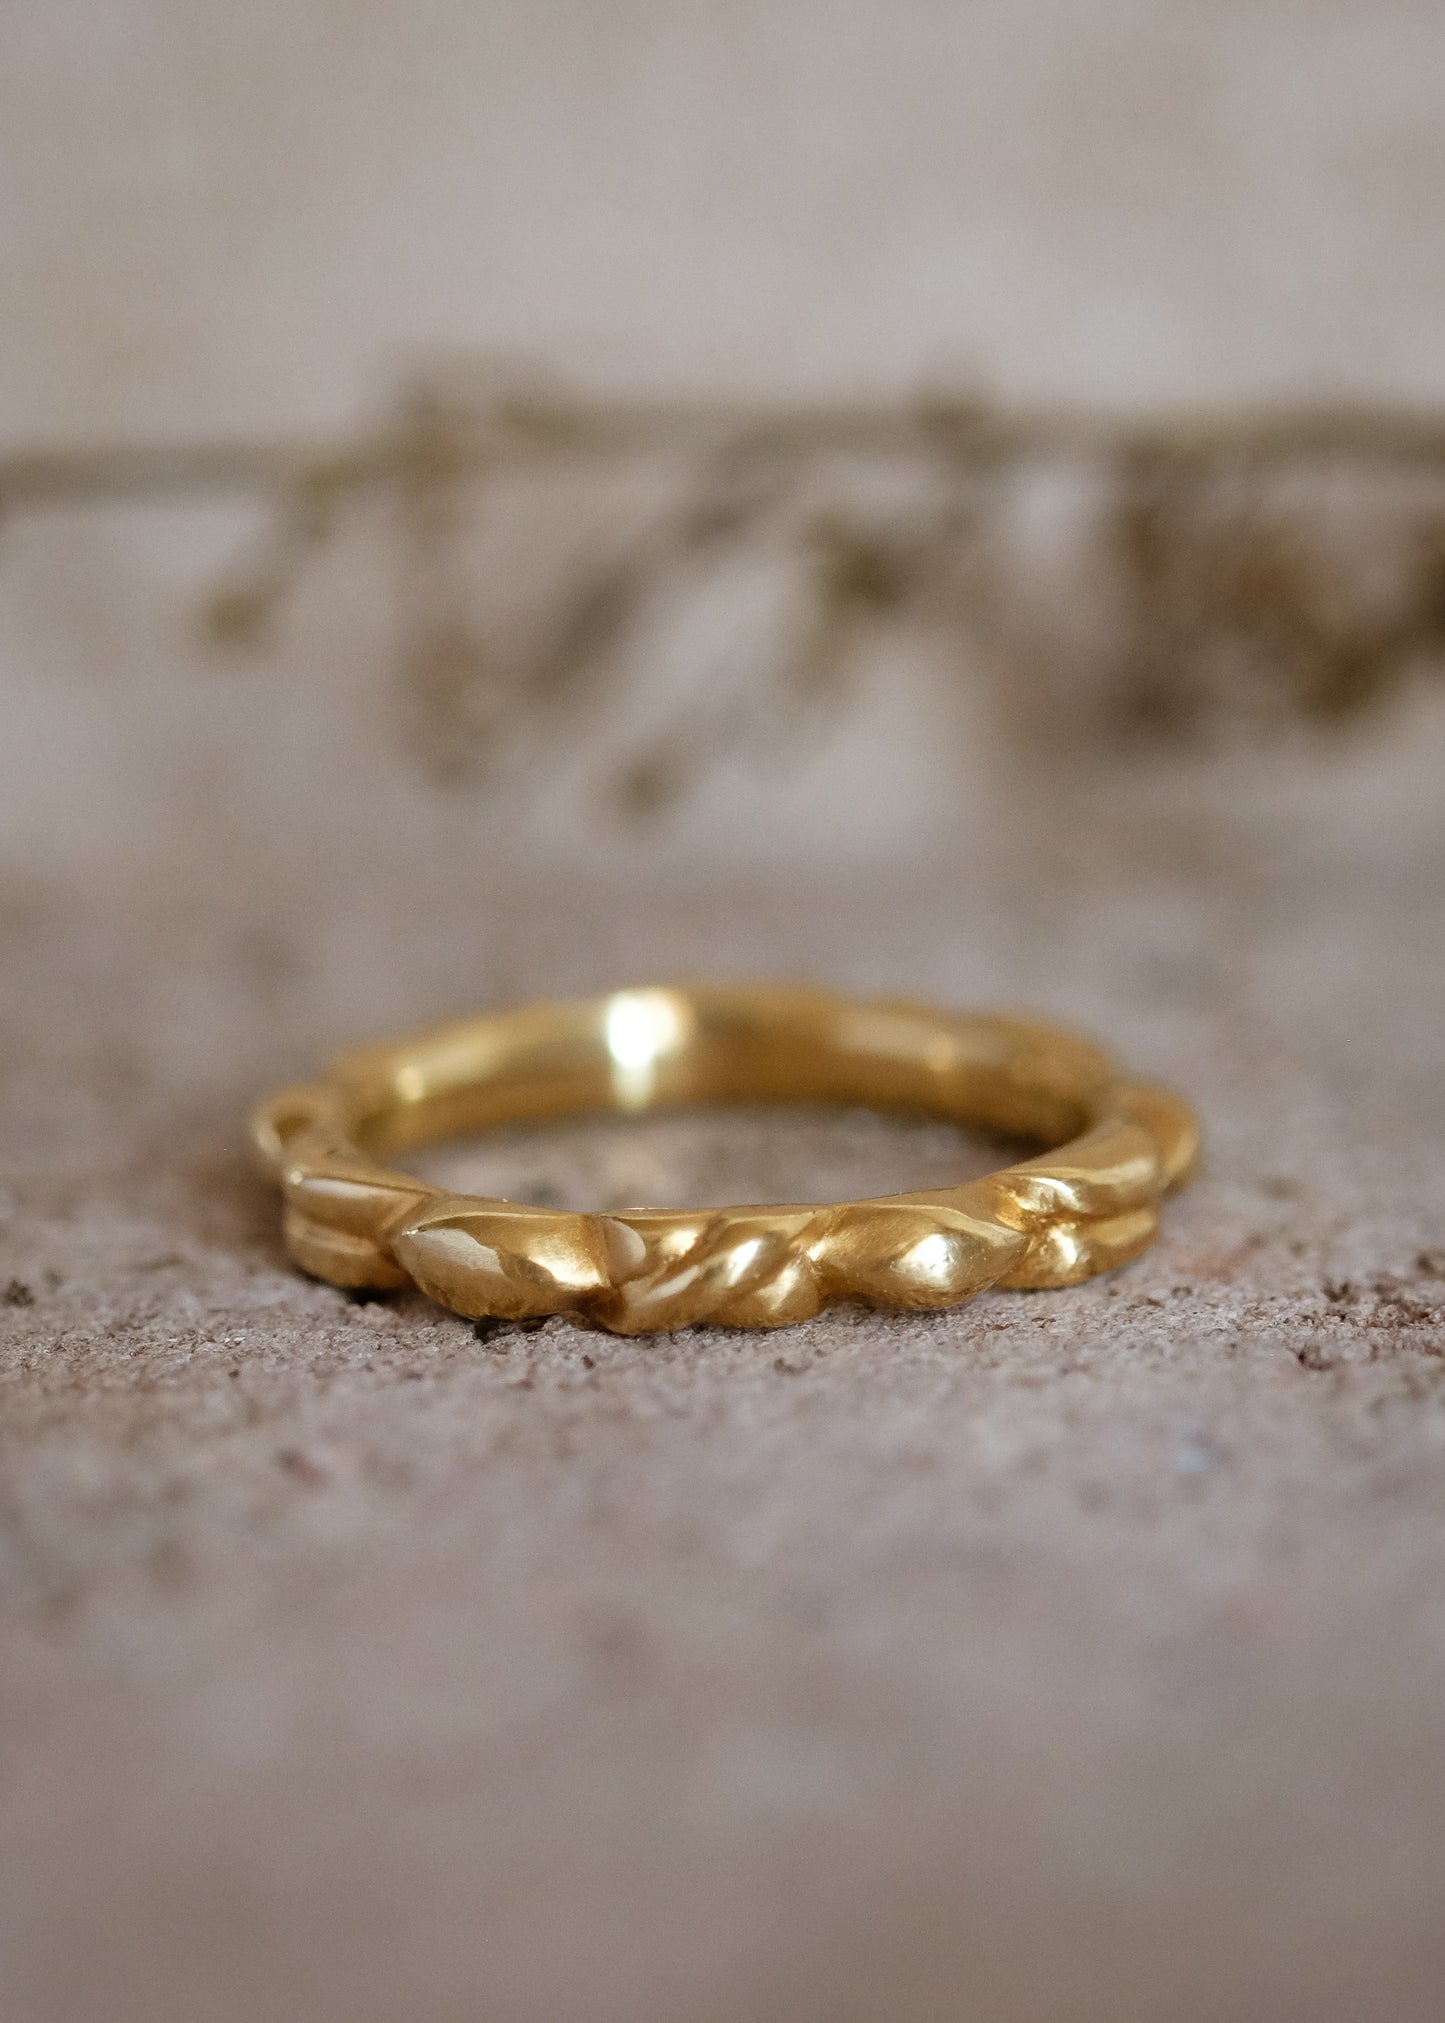 Out of many, one. The hand-carved Sheaf ring creates a woven braid pattern out of a single band of gold—a piece at once current and timeless.